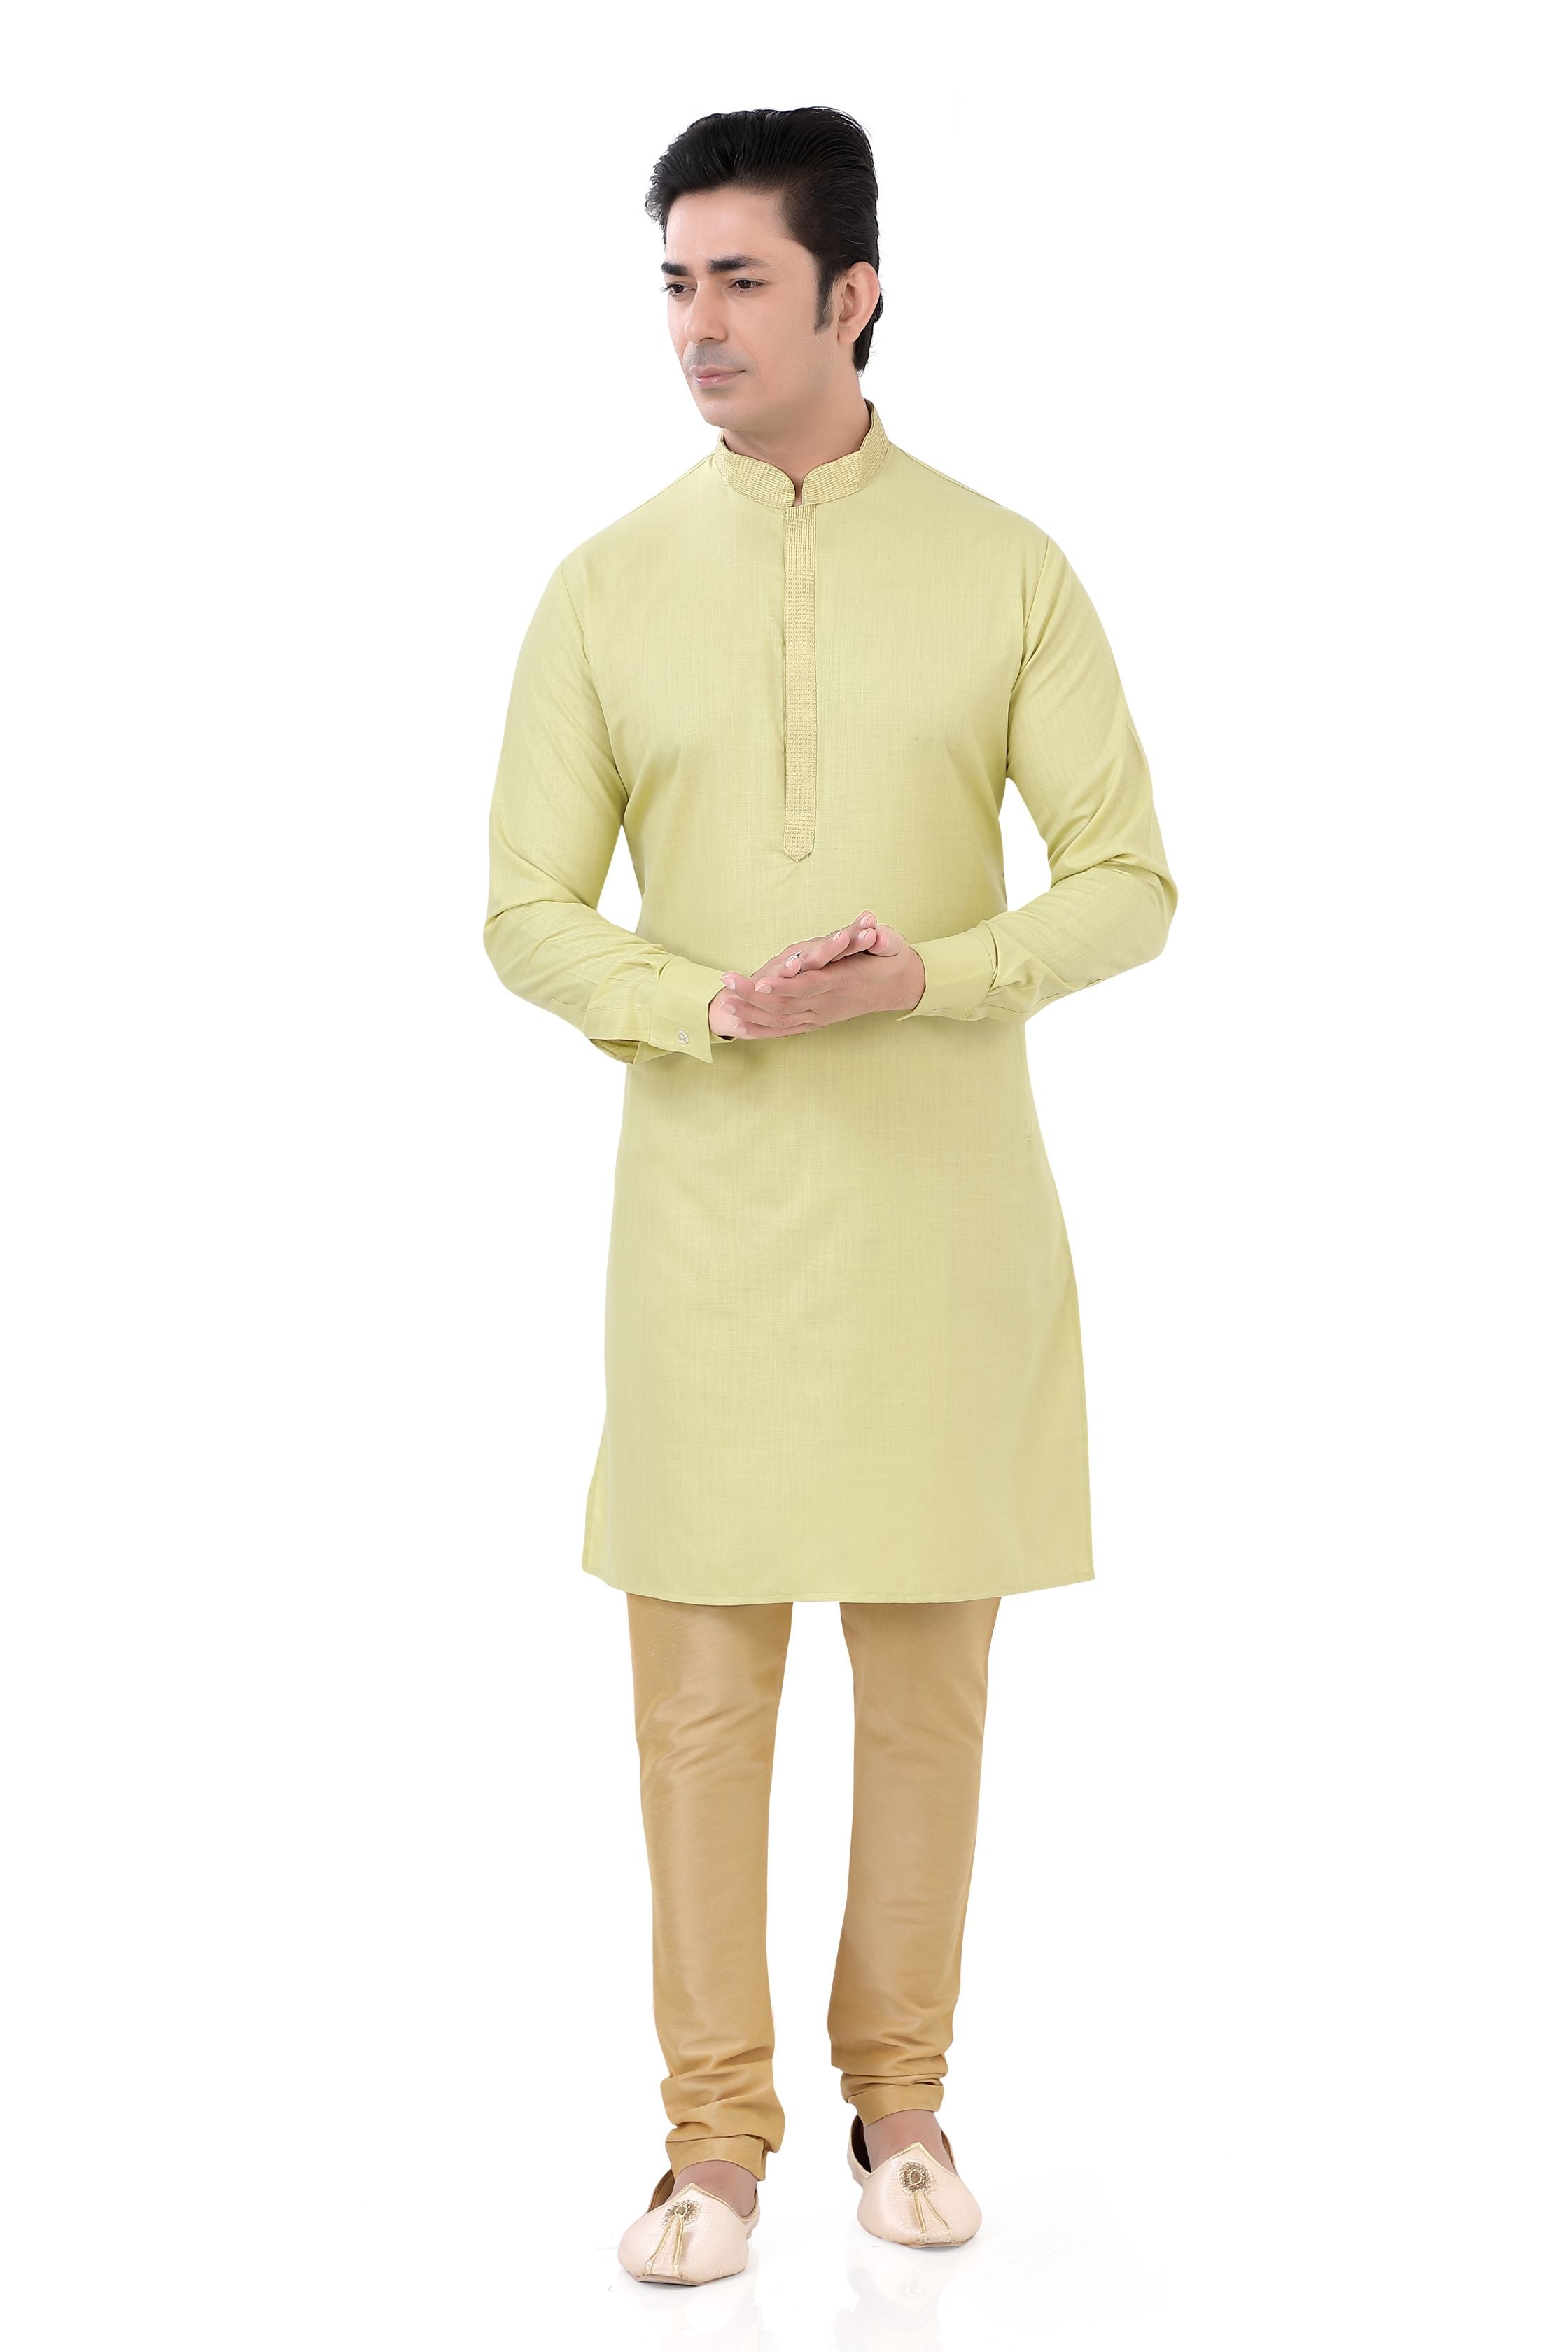 Cotton Anchor embroidery Kurta Pajama in Lime Green Colour